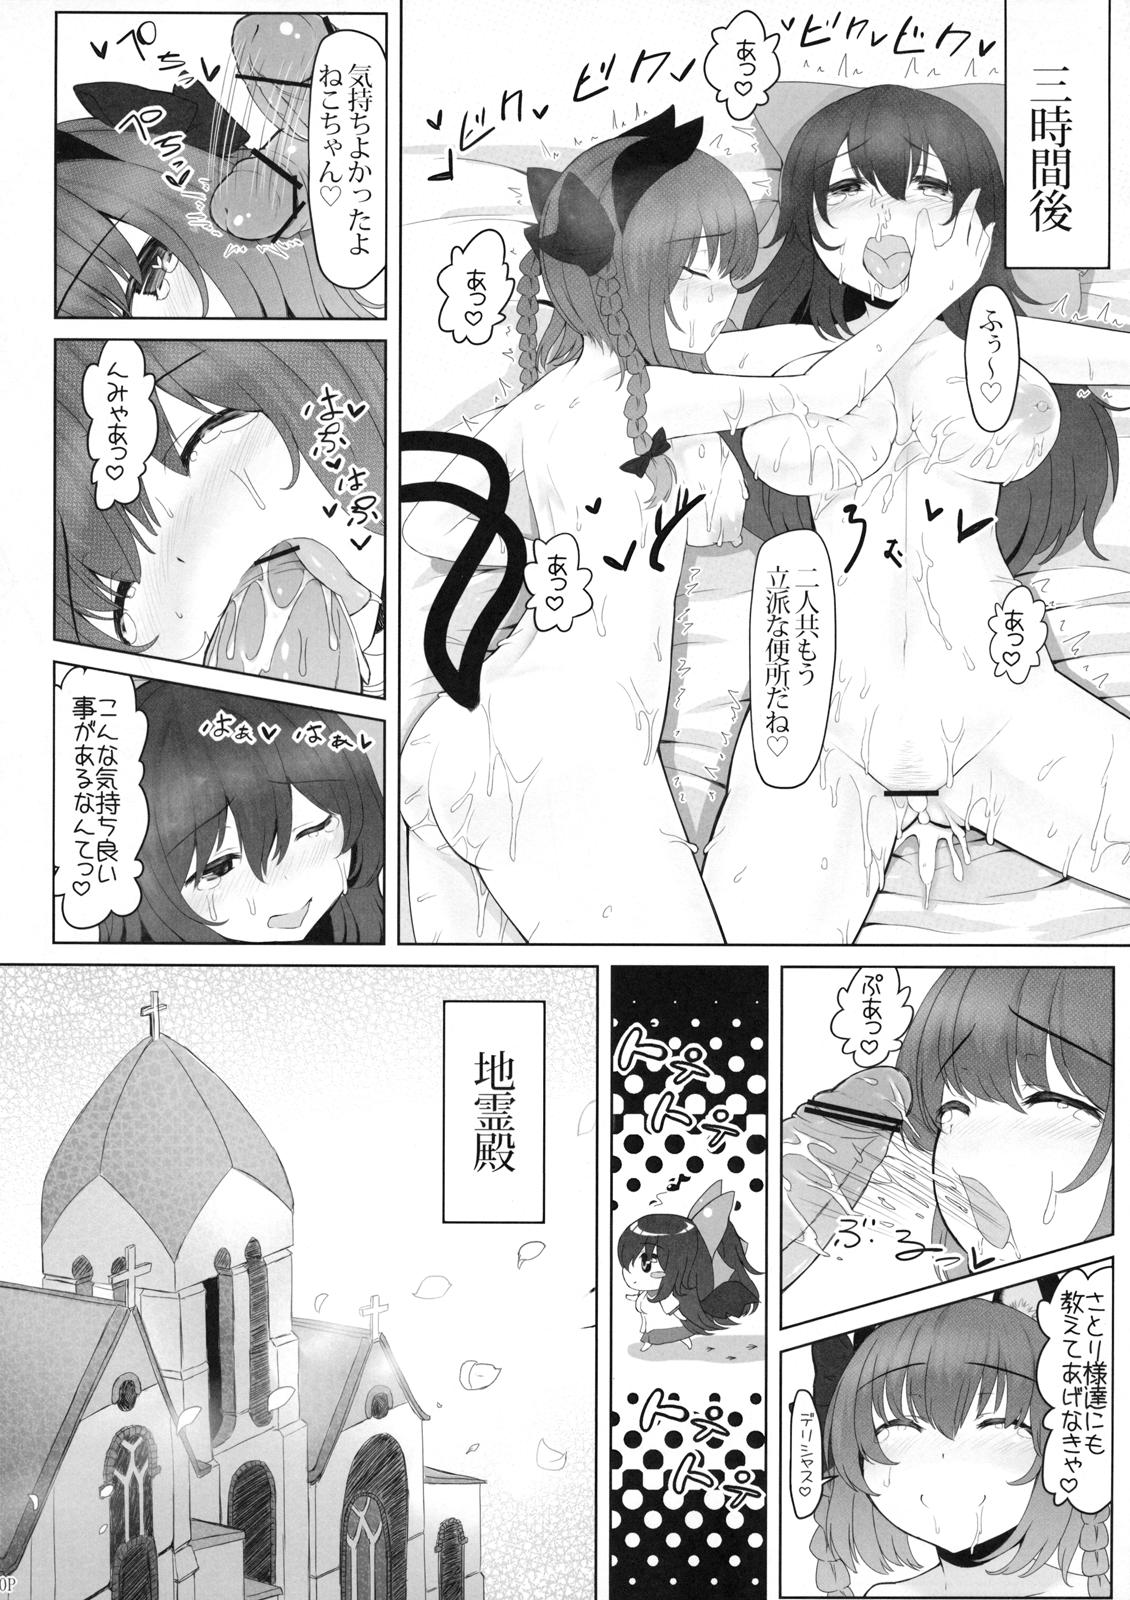 Nasty Free Porn KKMK vol.5 - Touhou project Ass Licking - Page 12